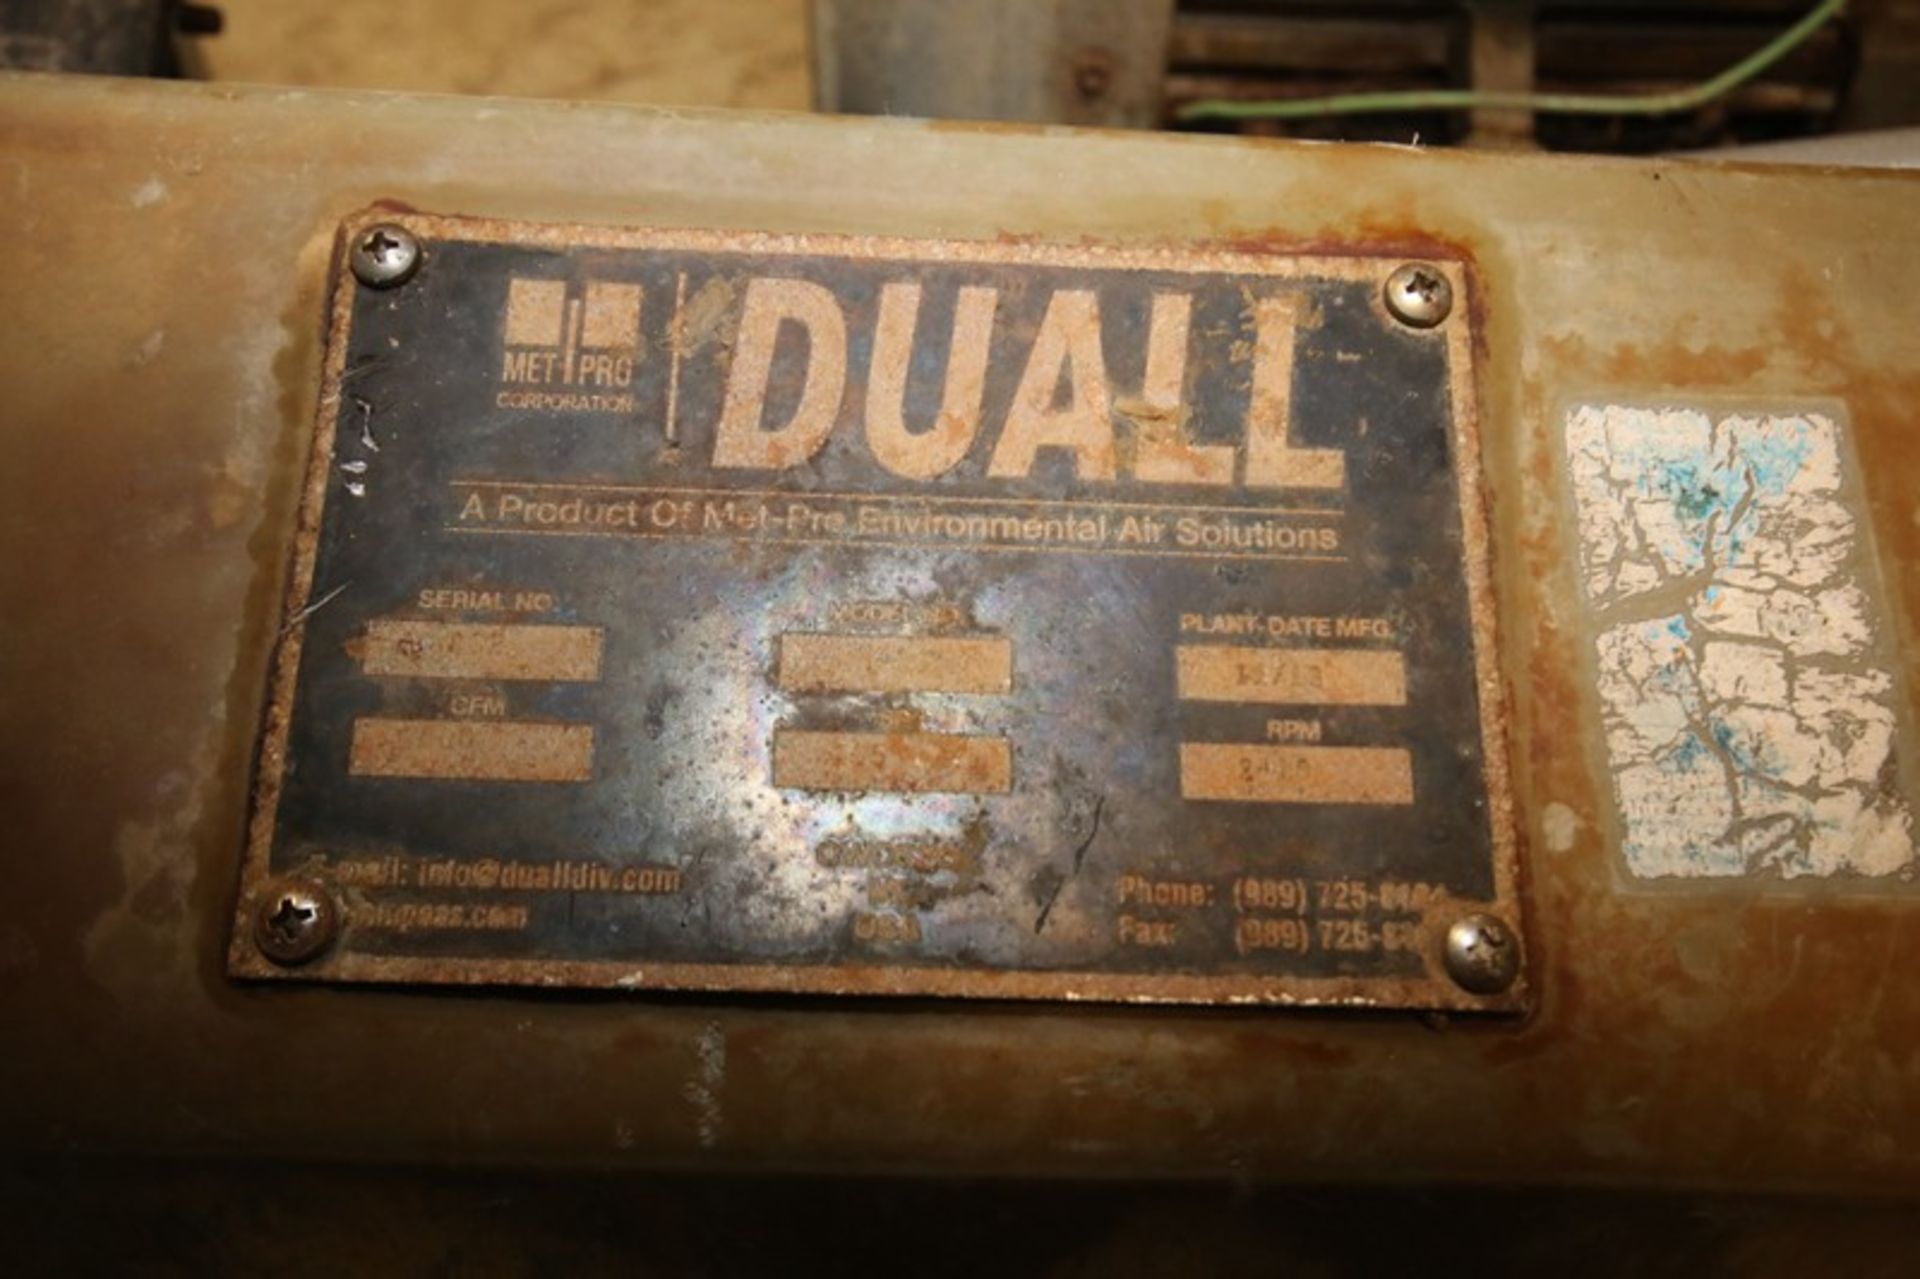 Duall 19" Blower System 7.5/5.5 hp, 1755 rpm 230/460 V, 19" x 14" Top Duct Connection (INV#84749)( - Image 5 of 5